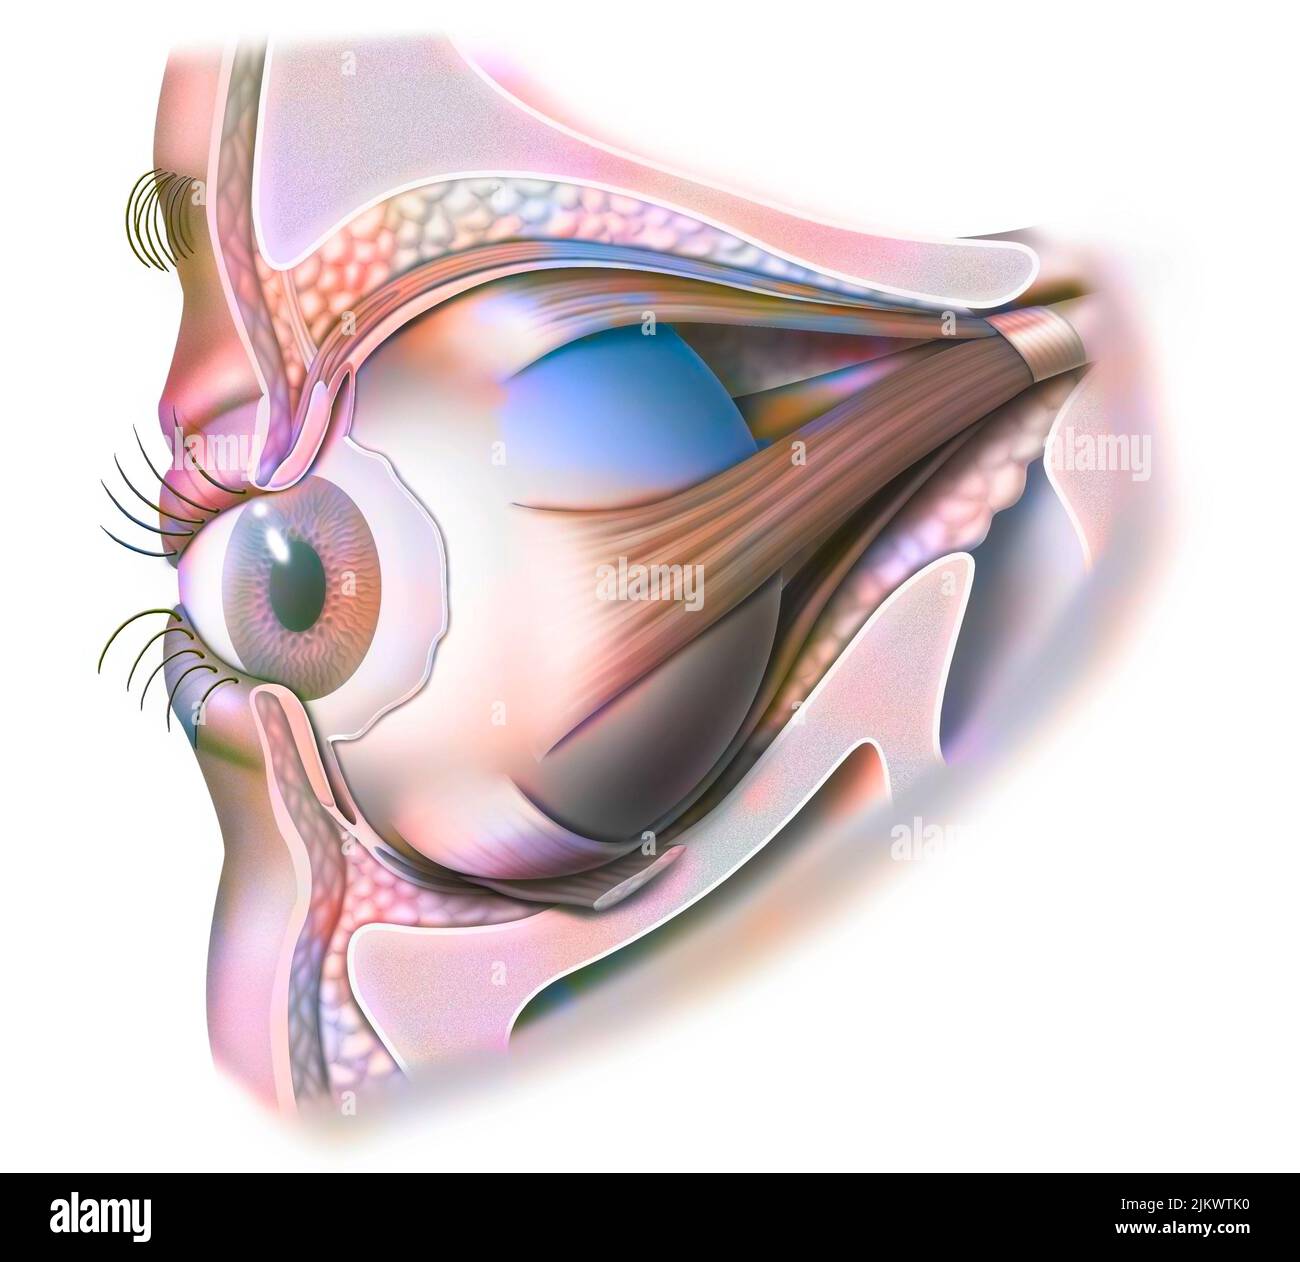 Anatomy of the eye and eyelid (viewed from 3/4) with iris, pupil. Stock Photo